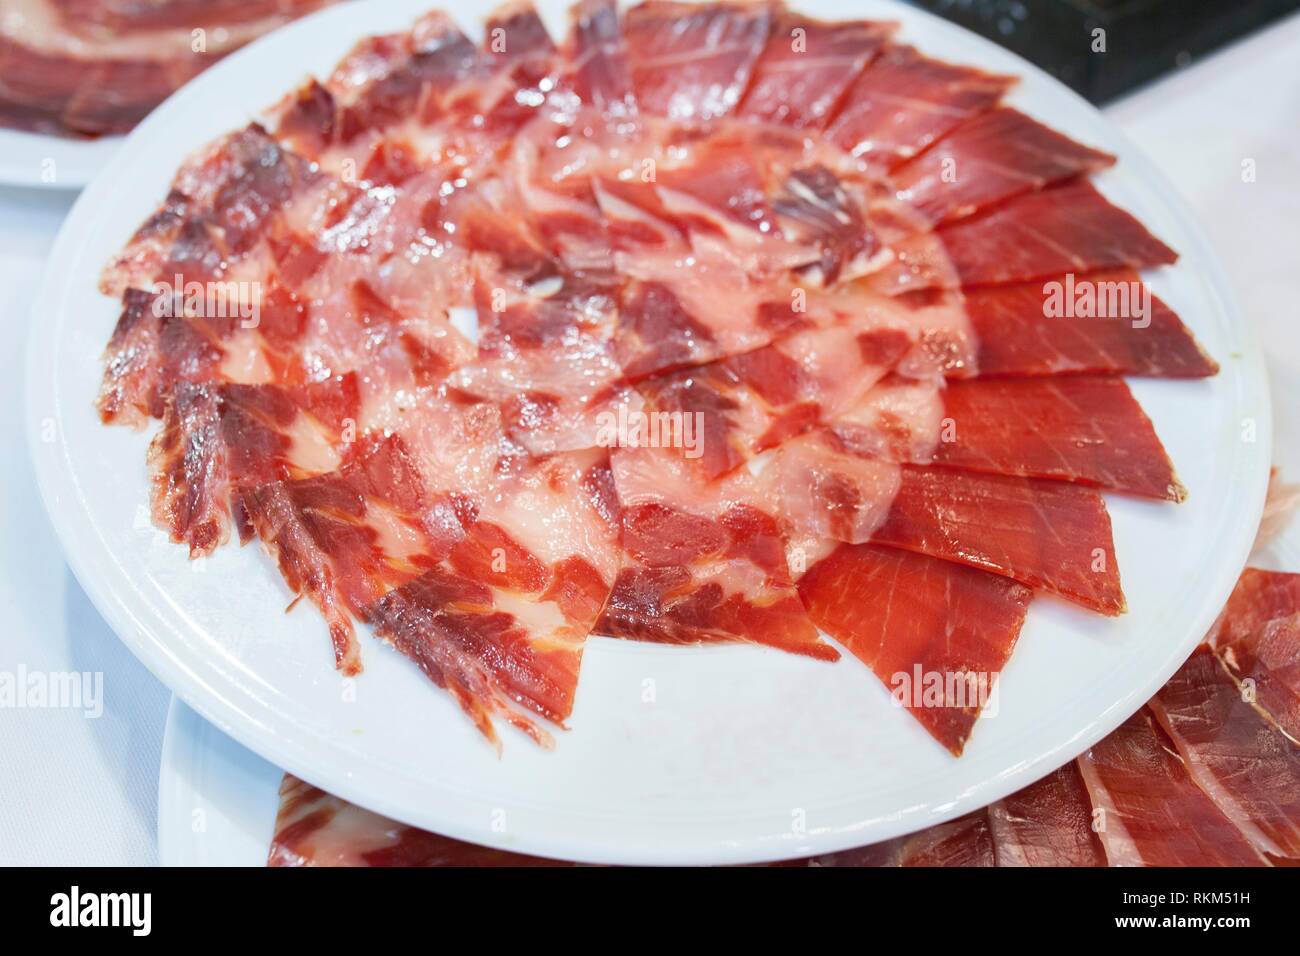 Circular decorative arrangement of iberian cured ham on plate. Empty space on plate to put a brand. Stock Photo